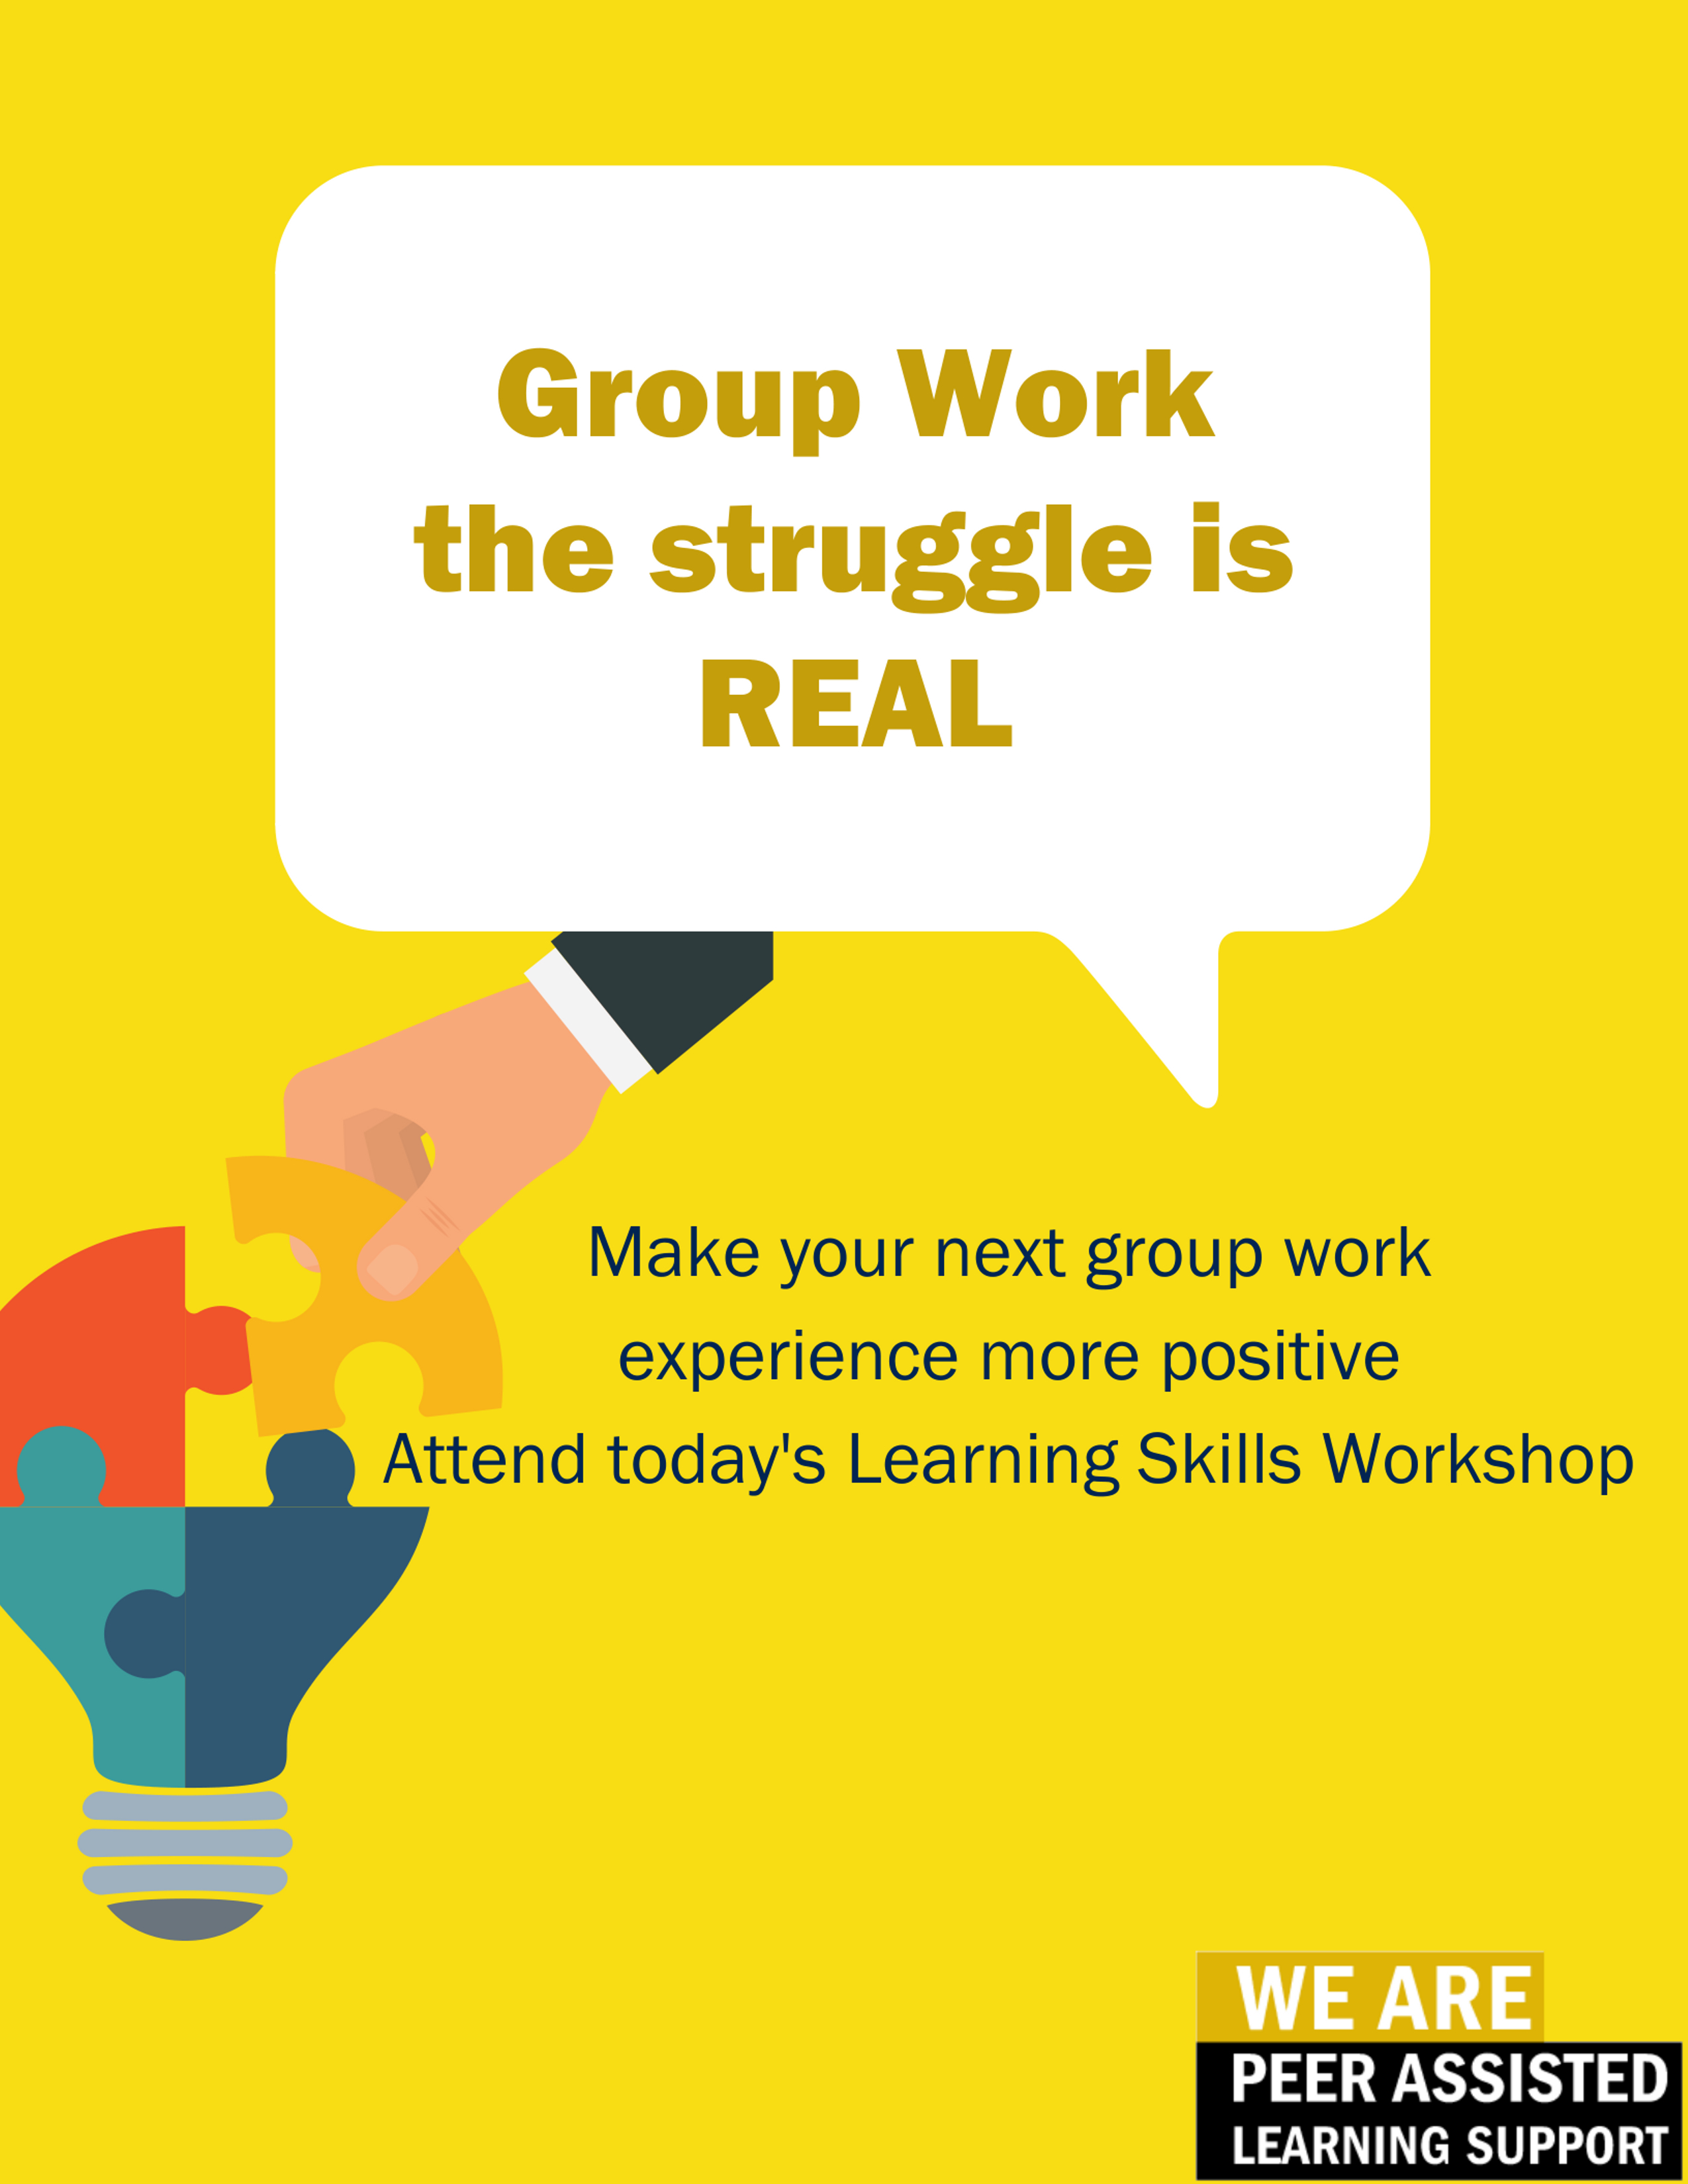 Discover ways to make your next group work a more positive experience.